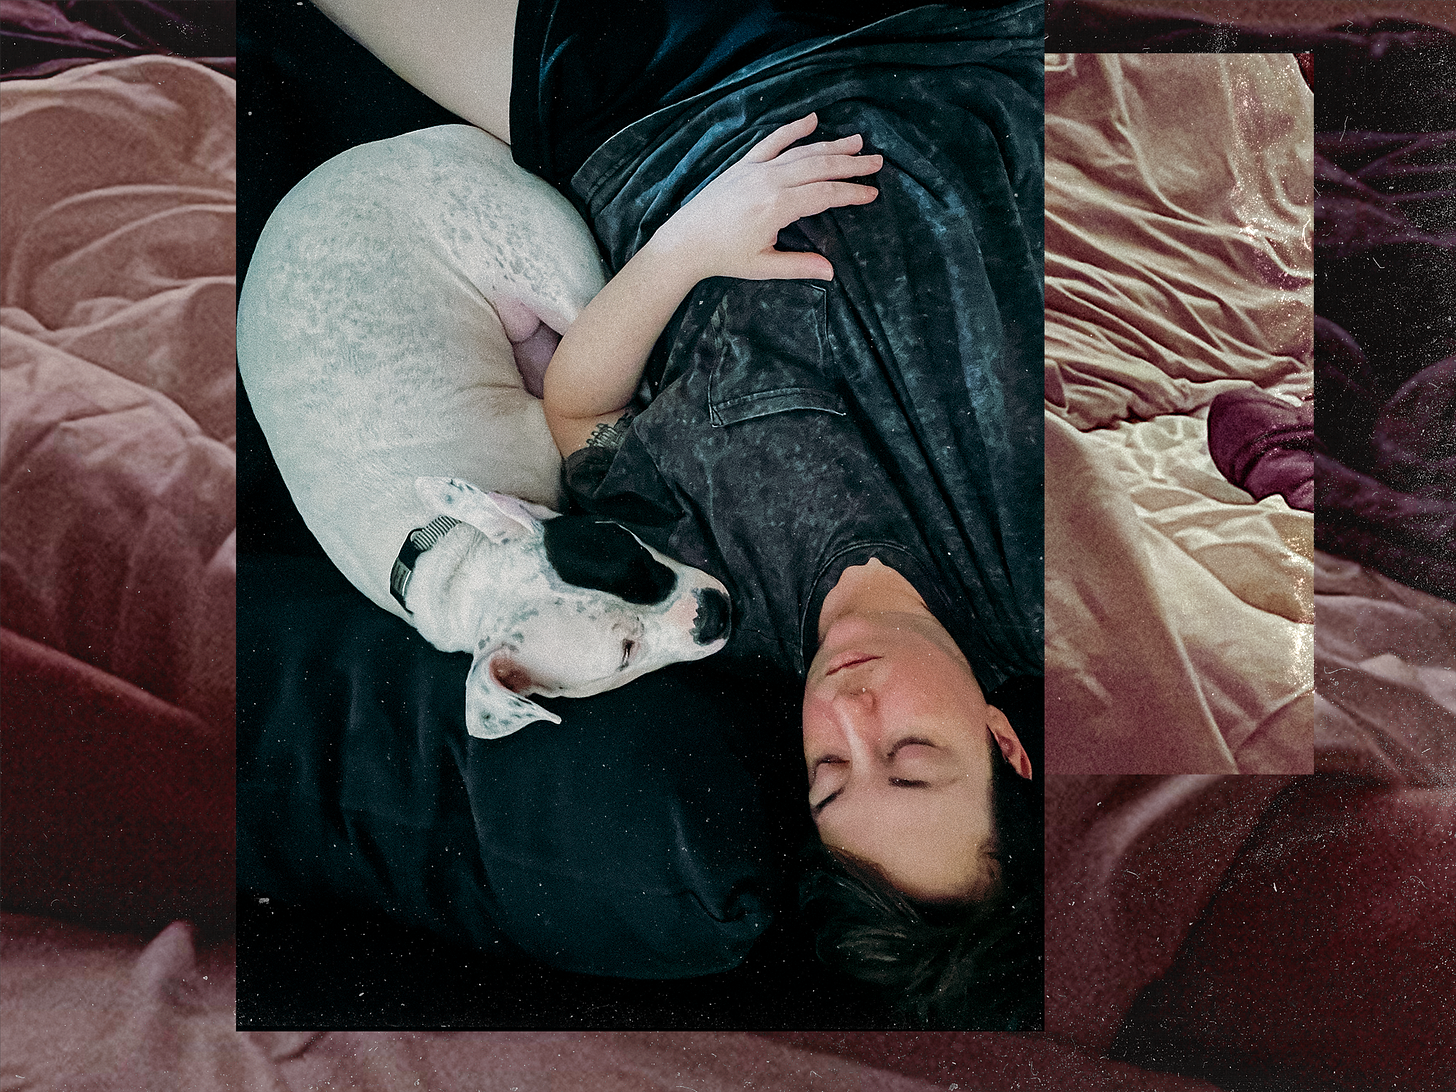 jess lays with their dog tato, both eyes closed. the image is upside down and on top of a dark close-up of crumpled sheets